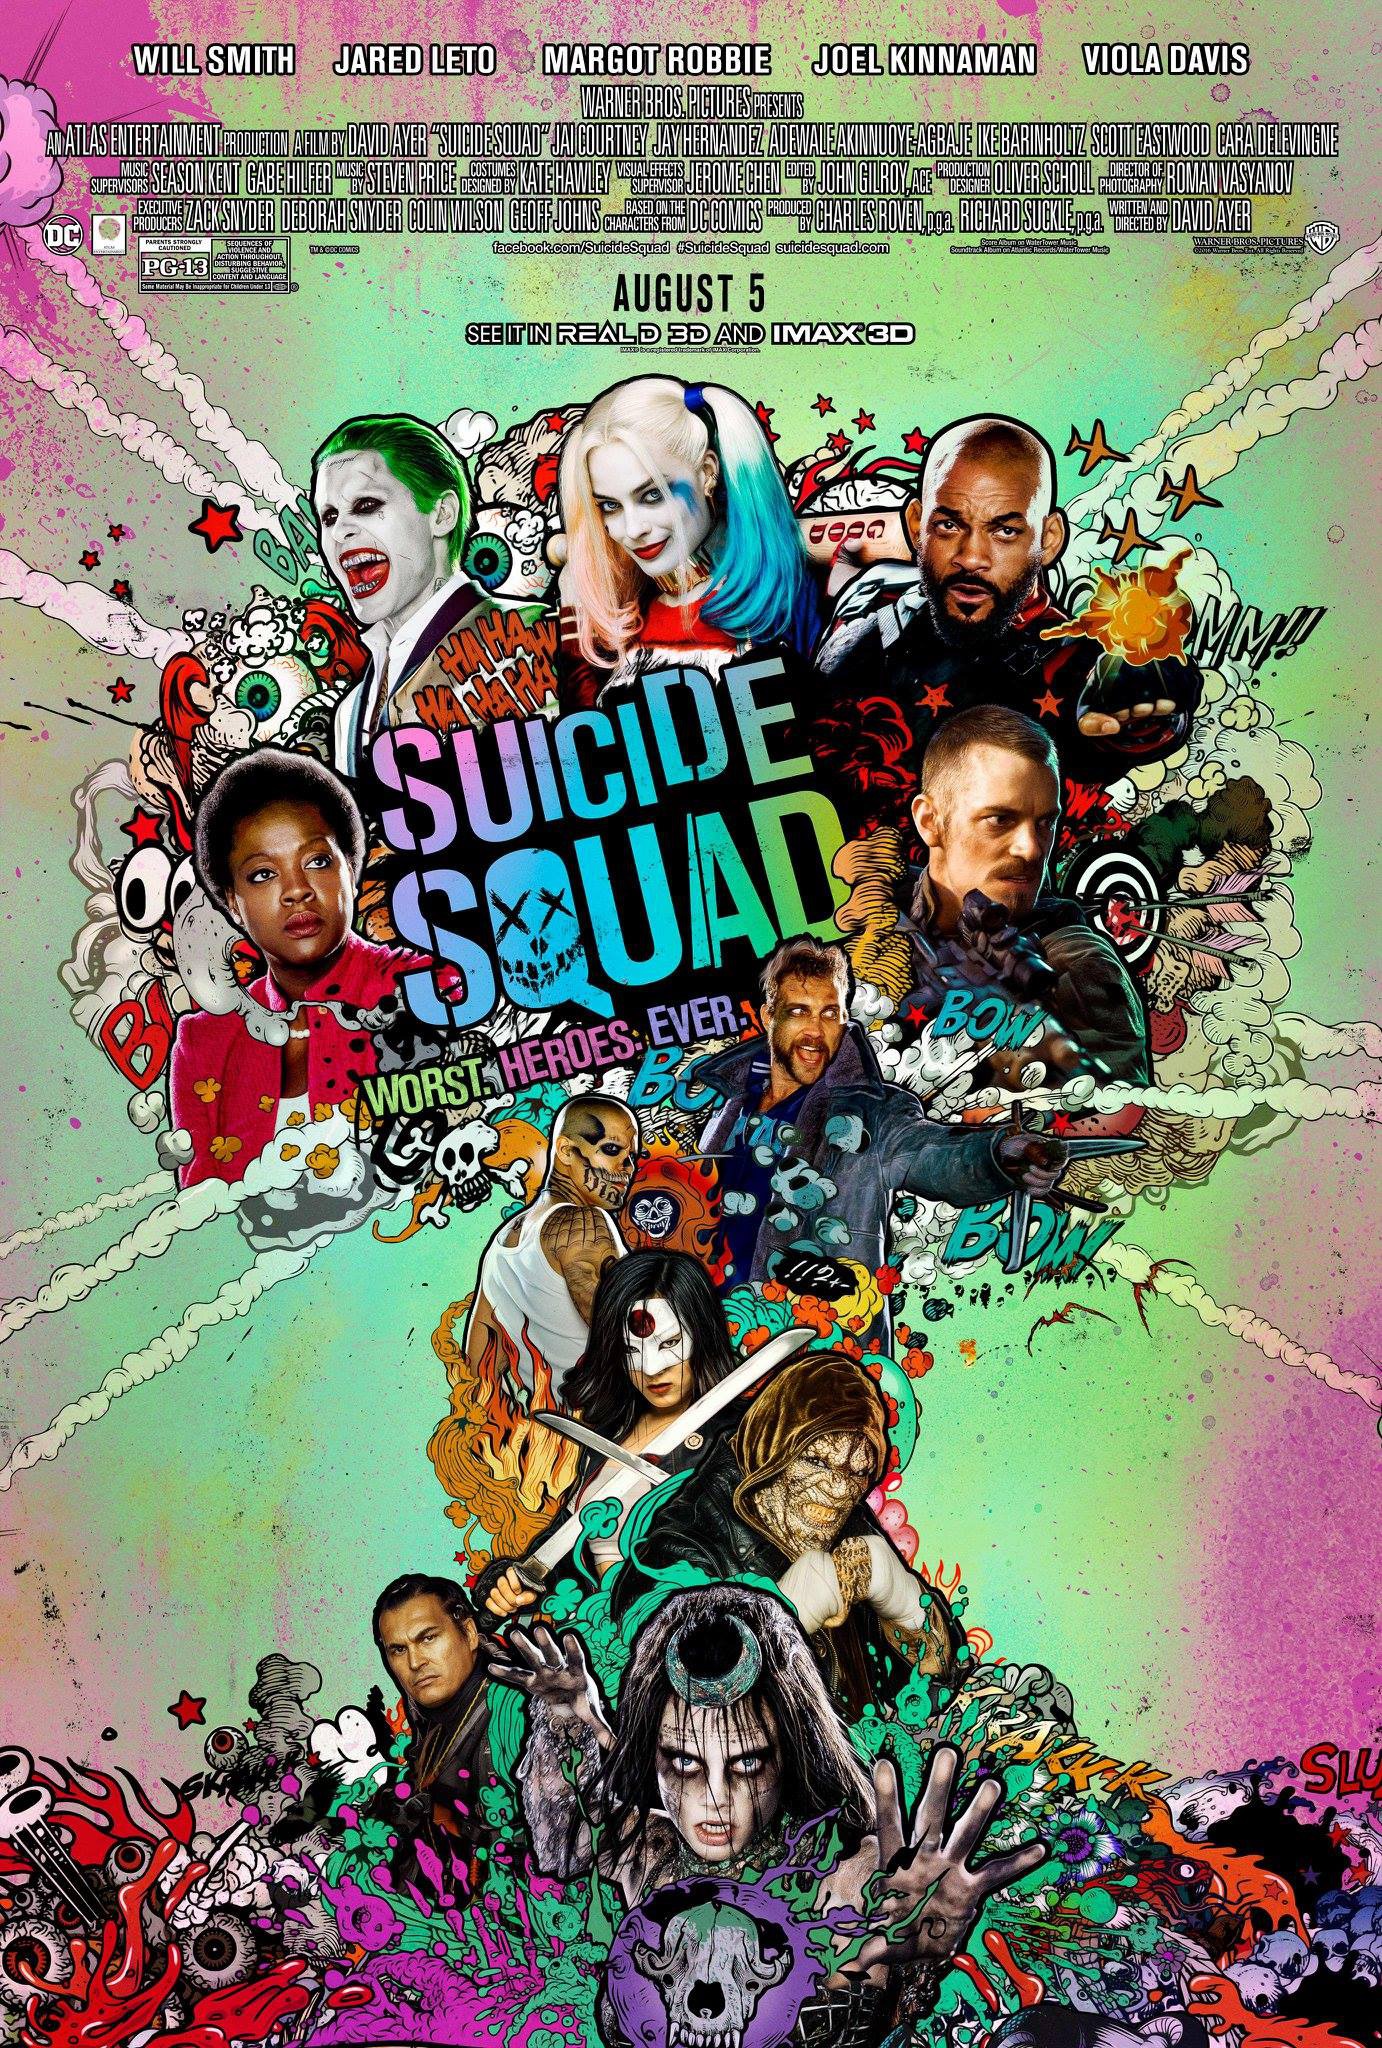 Suicide_Squad_New_Official_Poster_c_JPosters.jpg